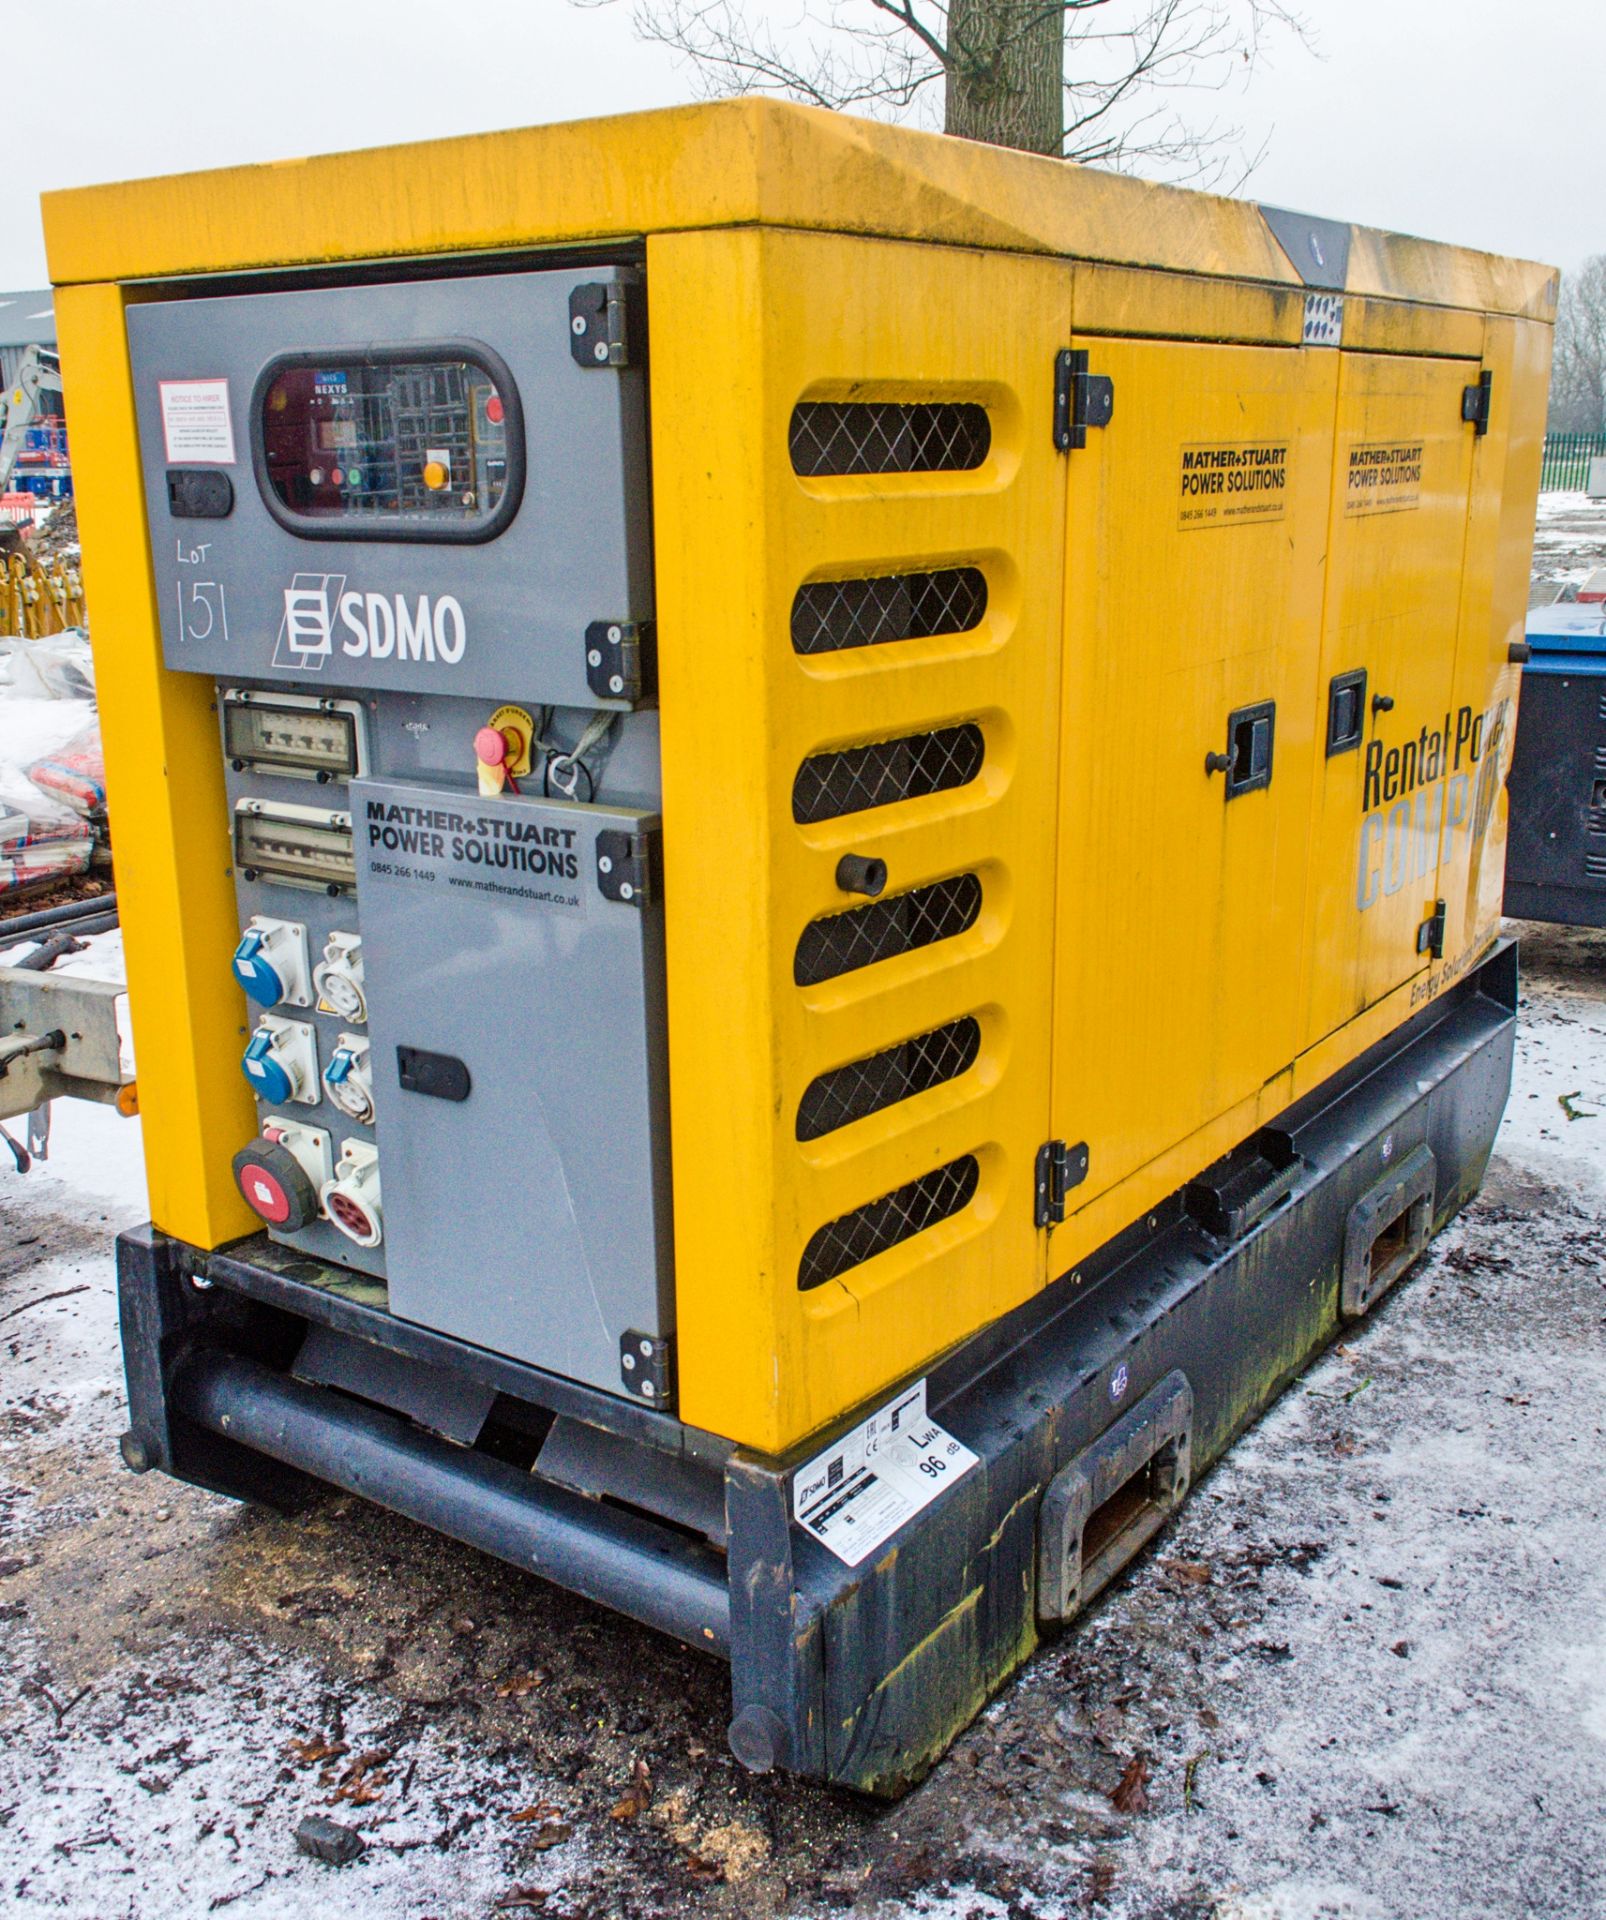 SDMO R66 60 kva static diesel driven generator Year: 2015 S/N: 4160 Recorded Hours: 6706